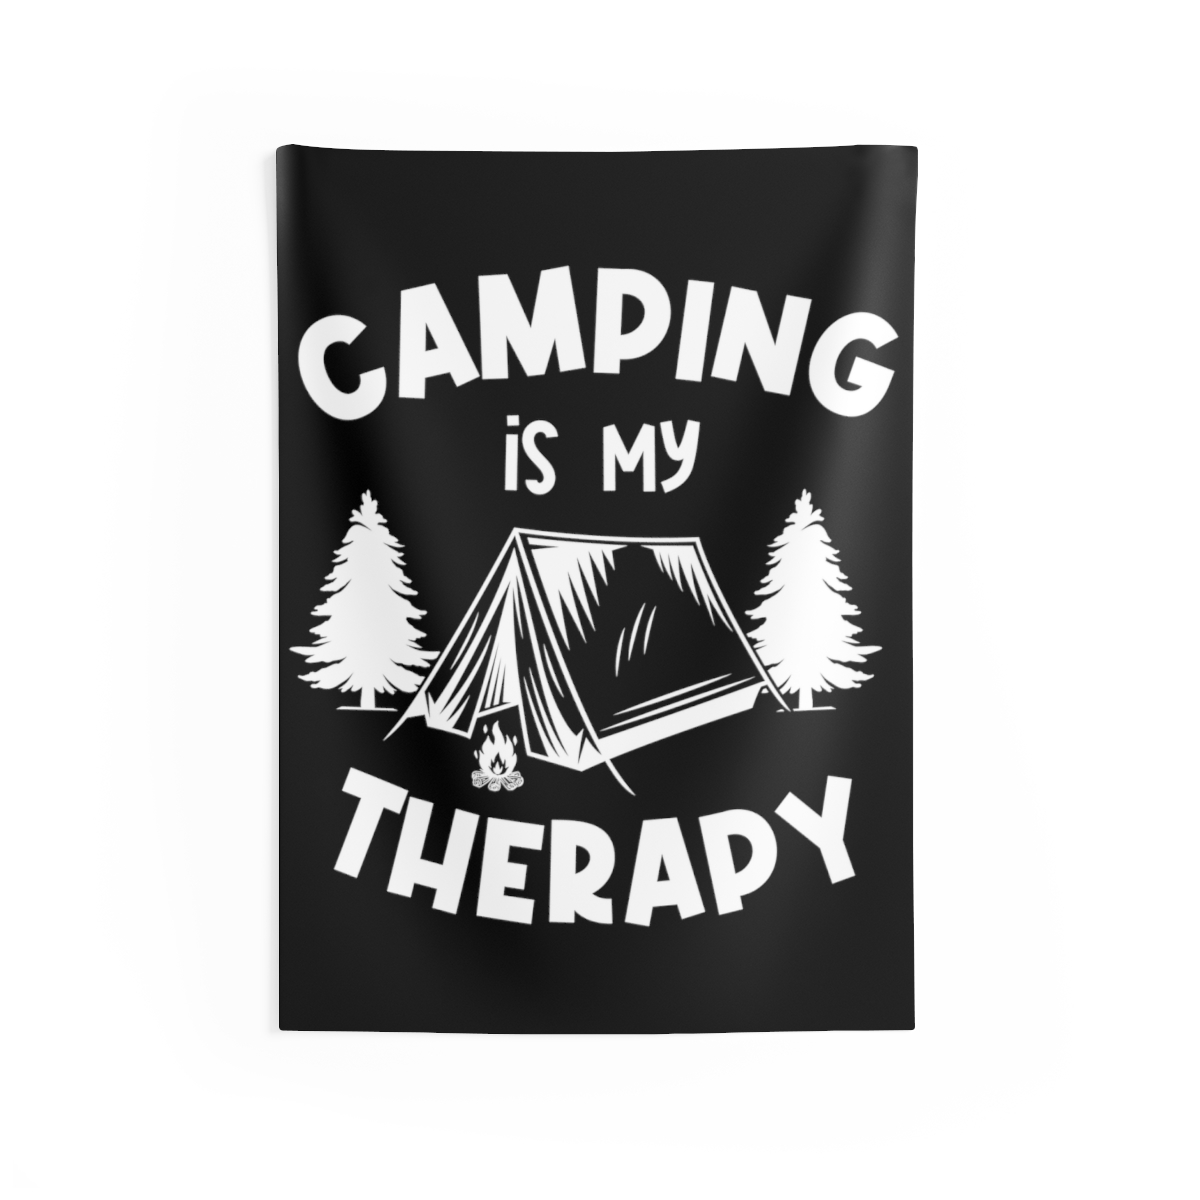 Camping is my Therapy Wall Tapestry | Minimalist Black and White Illustration |  - $26.78 - $69.01